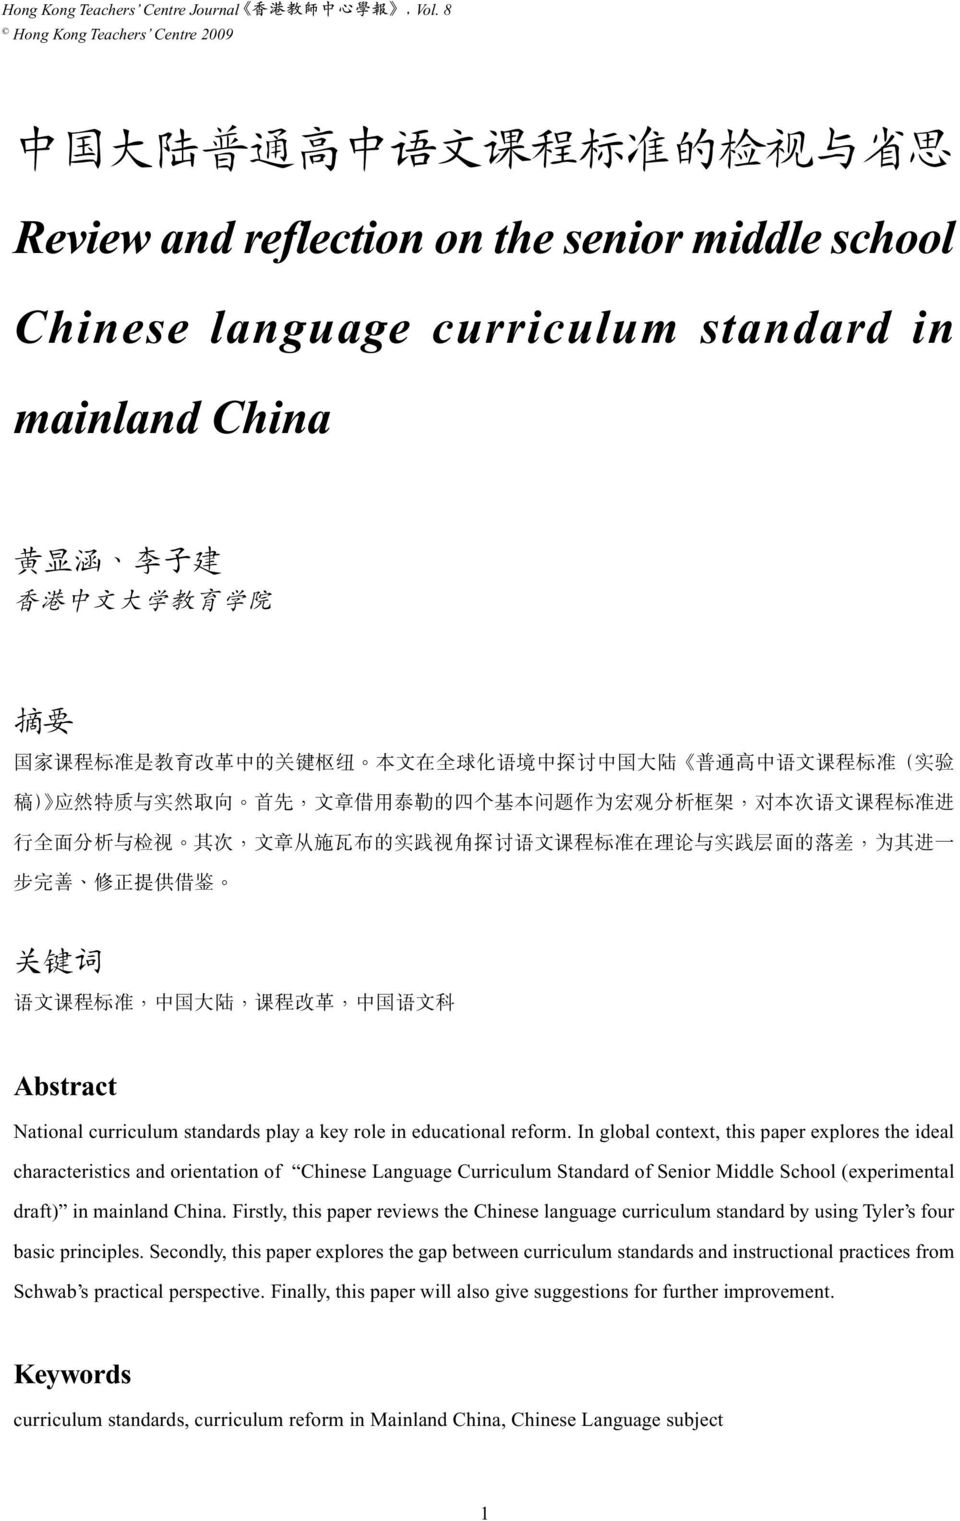 In global context, this paper explores the ideal characteristics and orientation of Chinese Language Curriculum Standard of Senior Middle School (experimental draft) in mainland China.